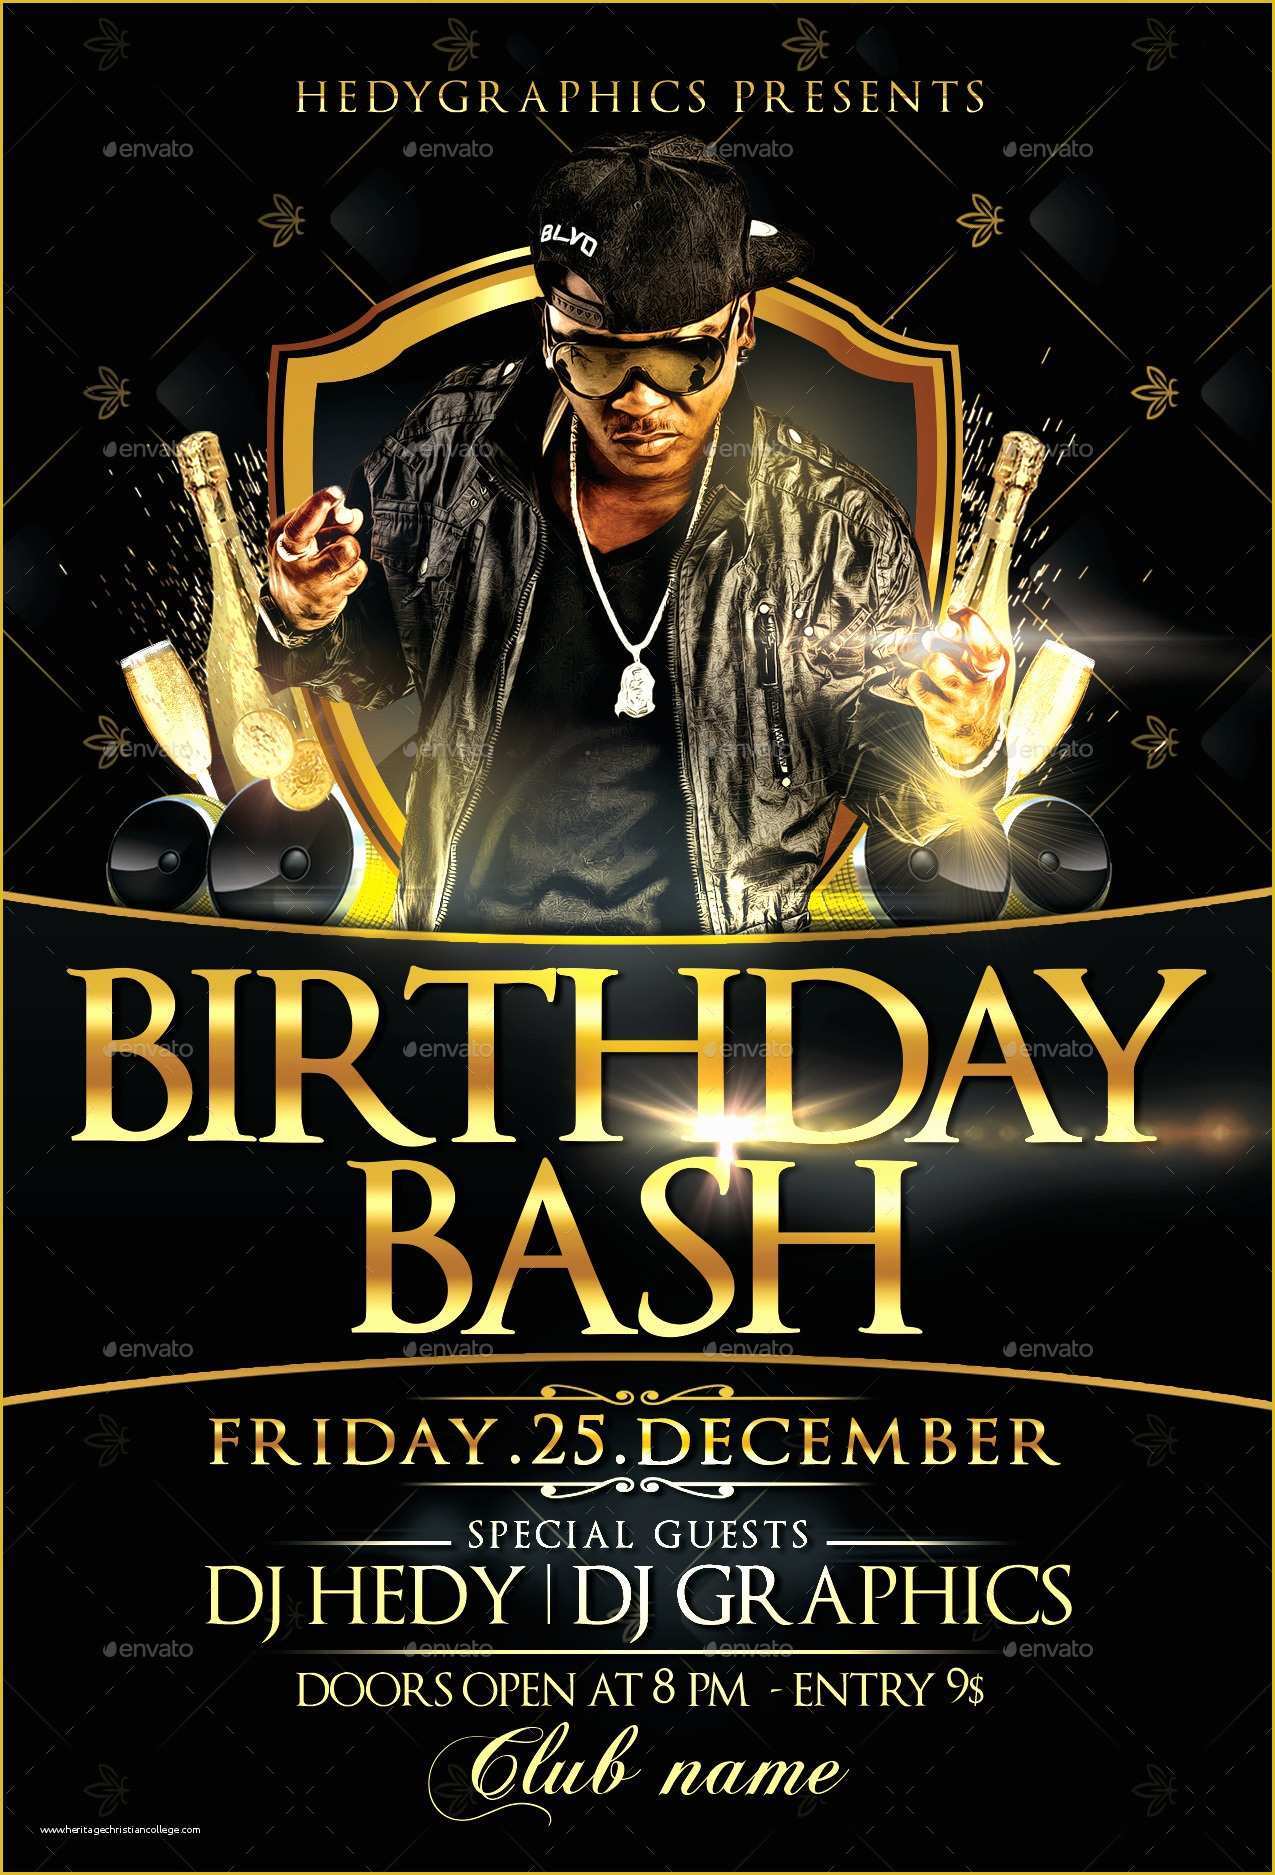 Free Birthday Flyer Templates Of Birthday Bash Flyer Template by Hedygraphics